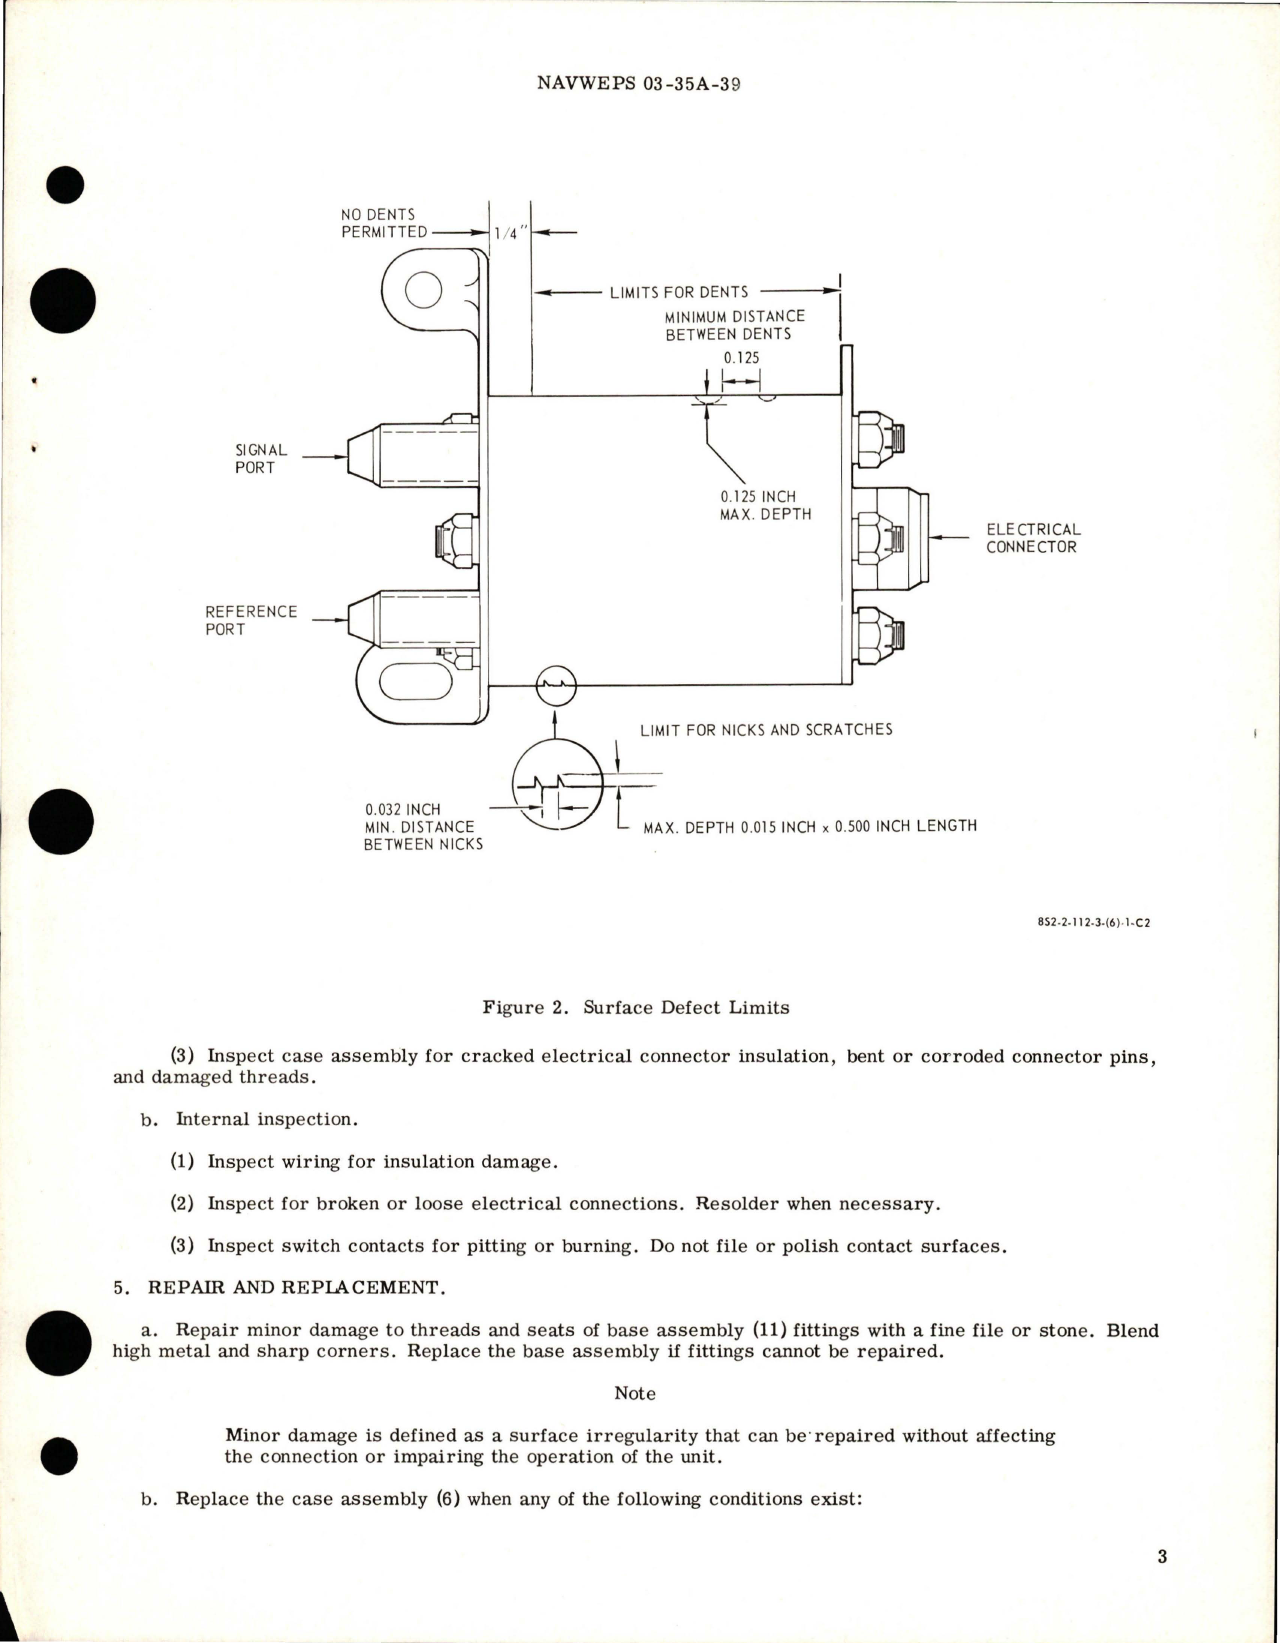 Sample page 5 from AirCorps Library document: Overhaul Instructions with Parts Breakdown for Anti-Icing Pressure Indicating Switch - Model CG123901 - Part 576C60P3